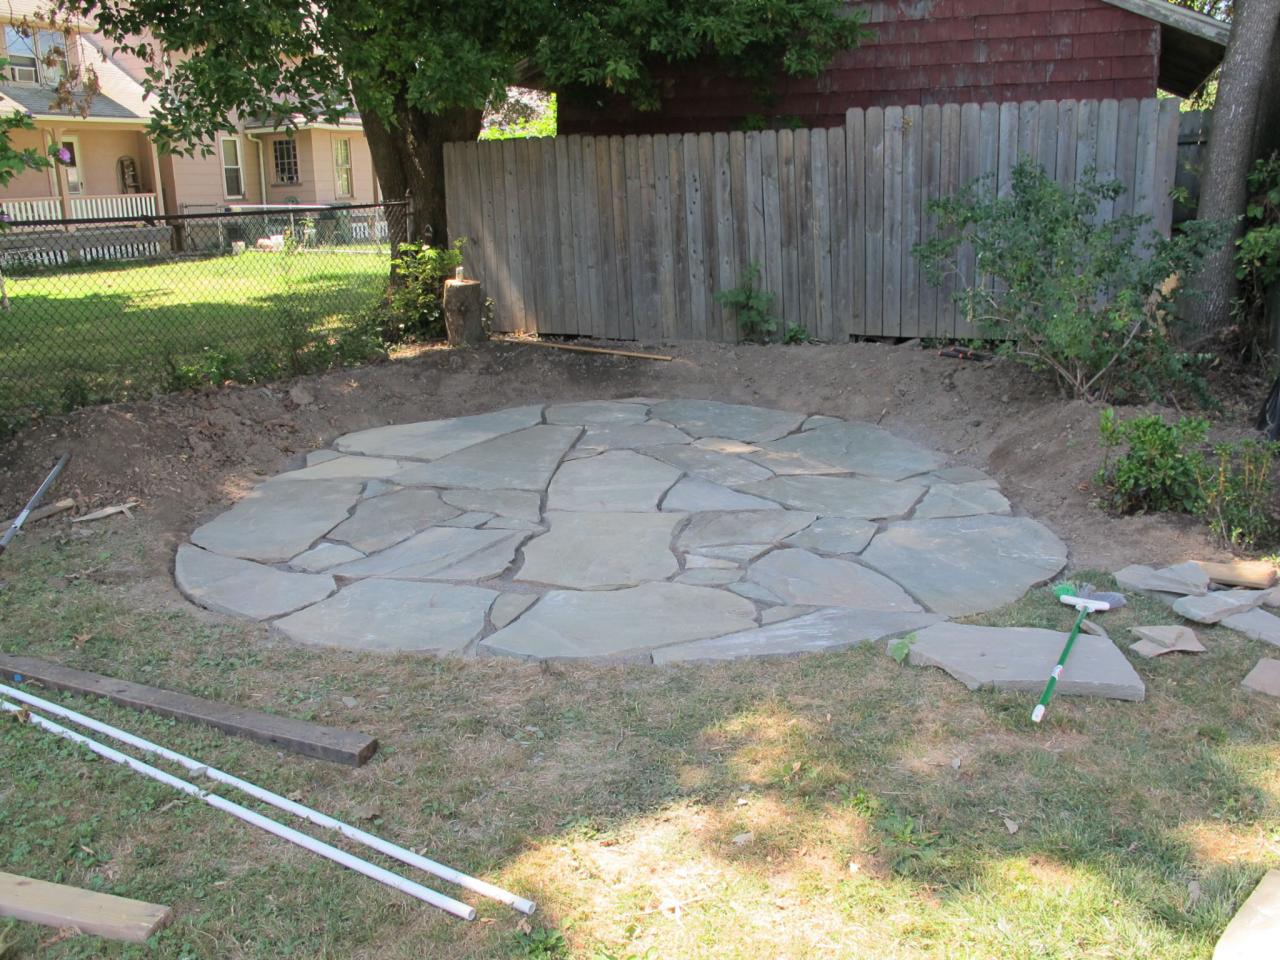 How To Install A Flagstone Patio With Irregular Stones Diy Network Blog Made Remade - How To Make A Round Flagstone Patio